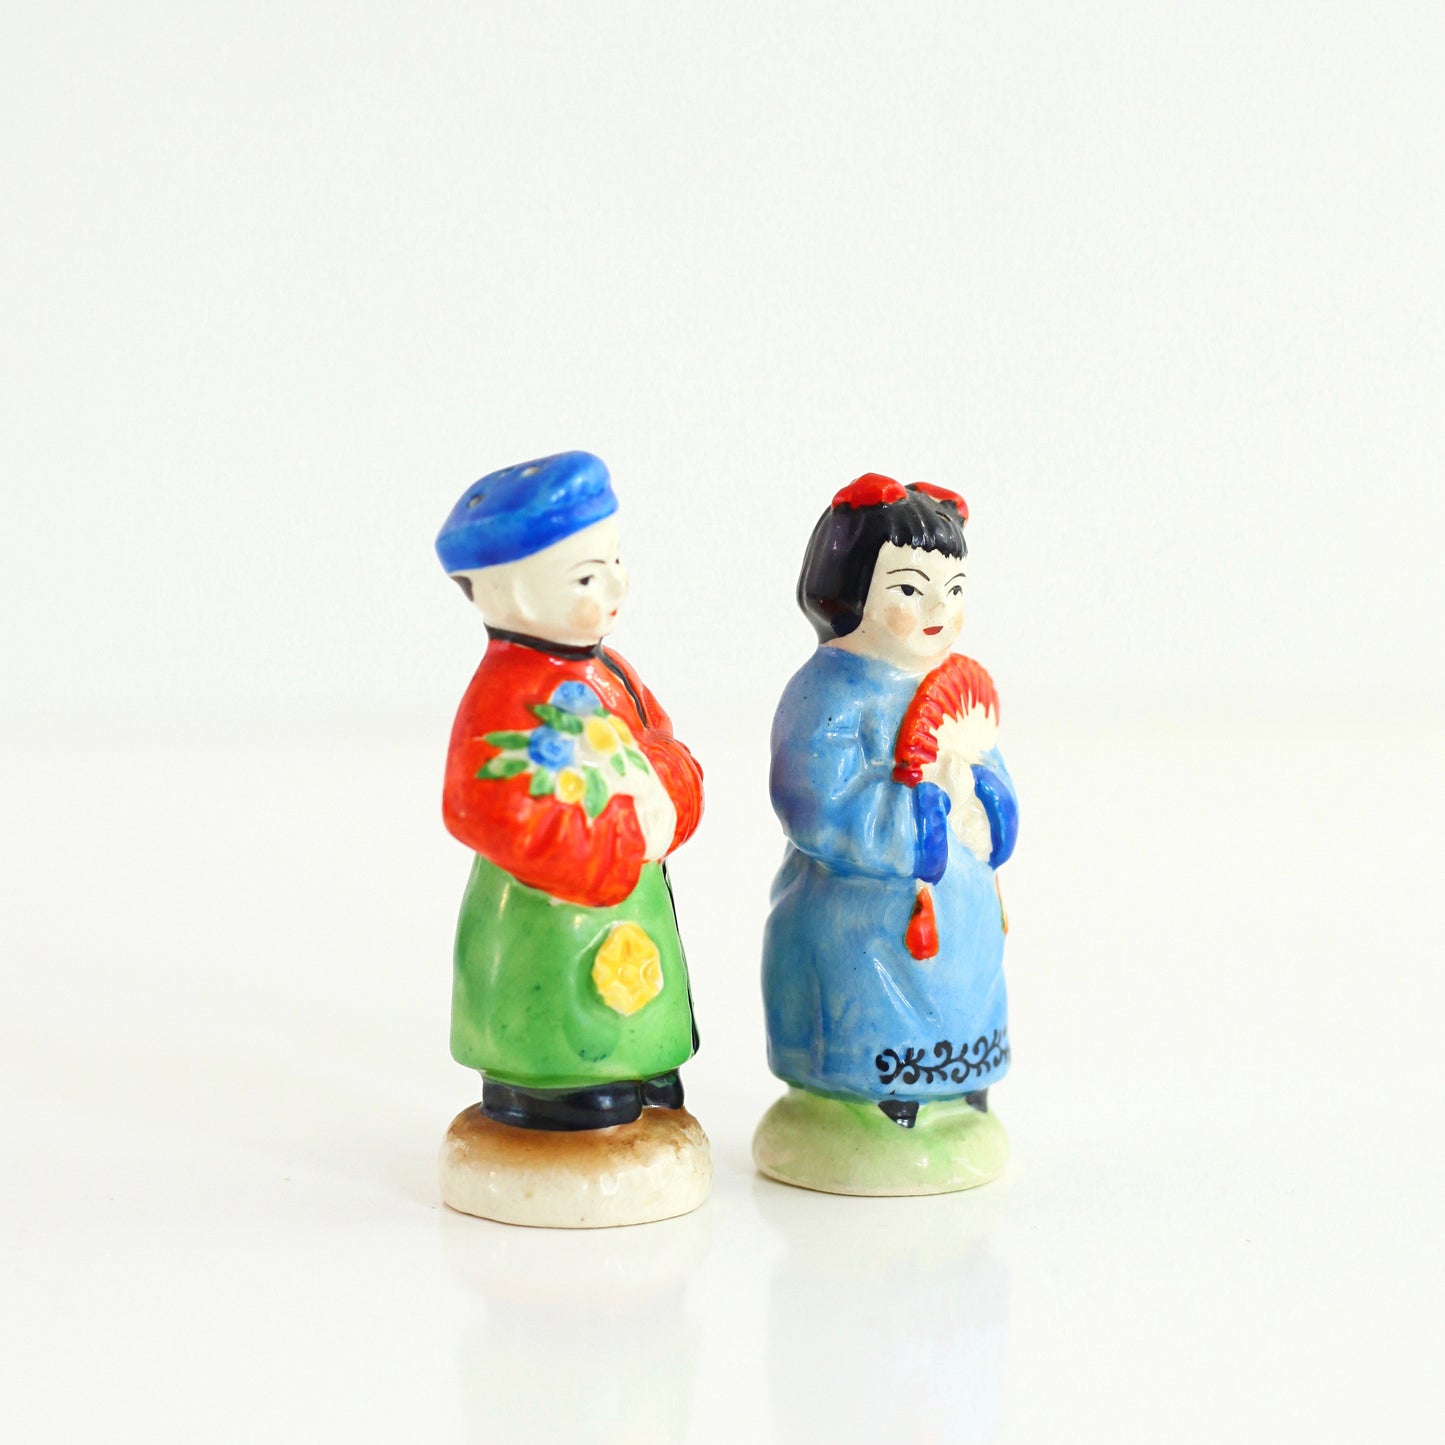 SOLD - Vintage Asian Man and Woman Salt and Pepper Shakers from Japan